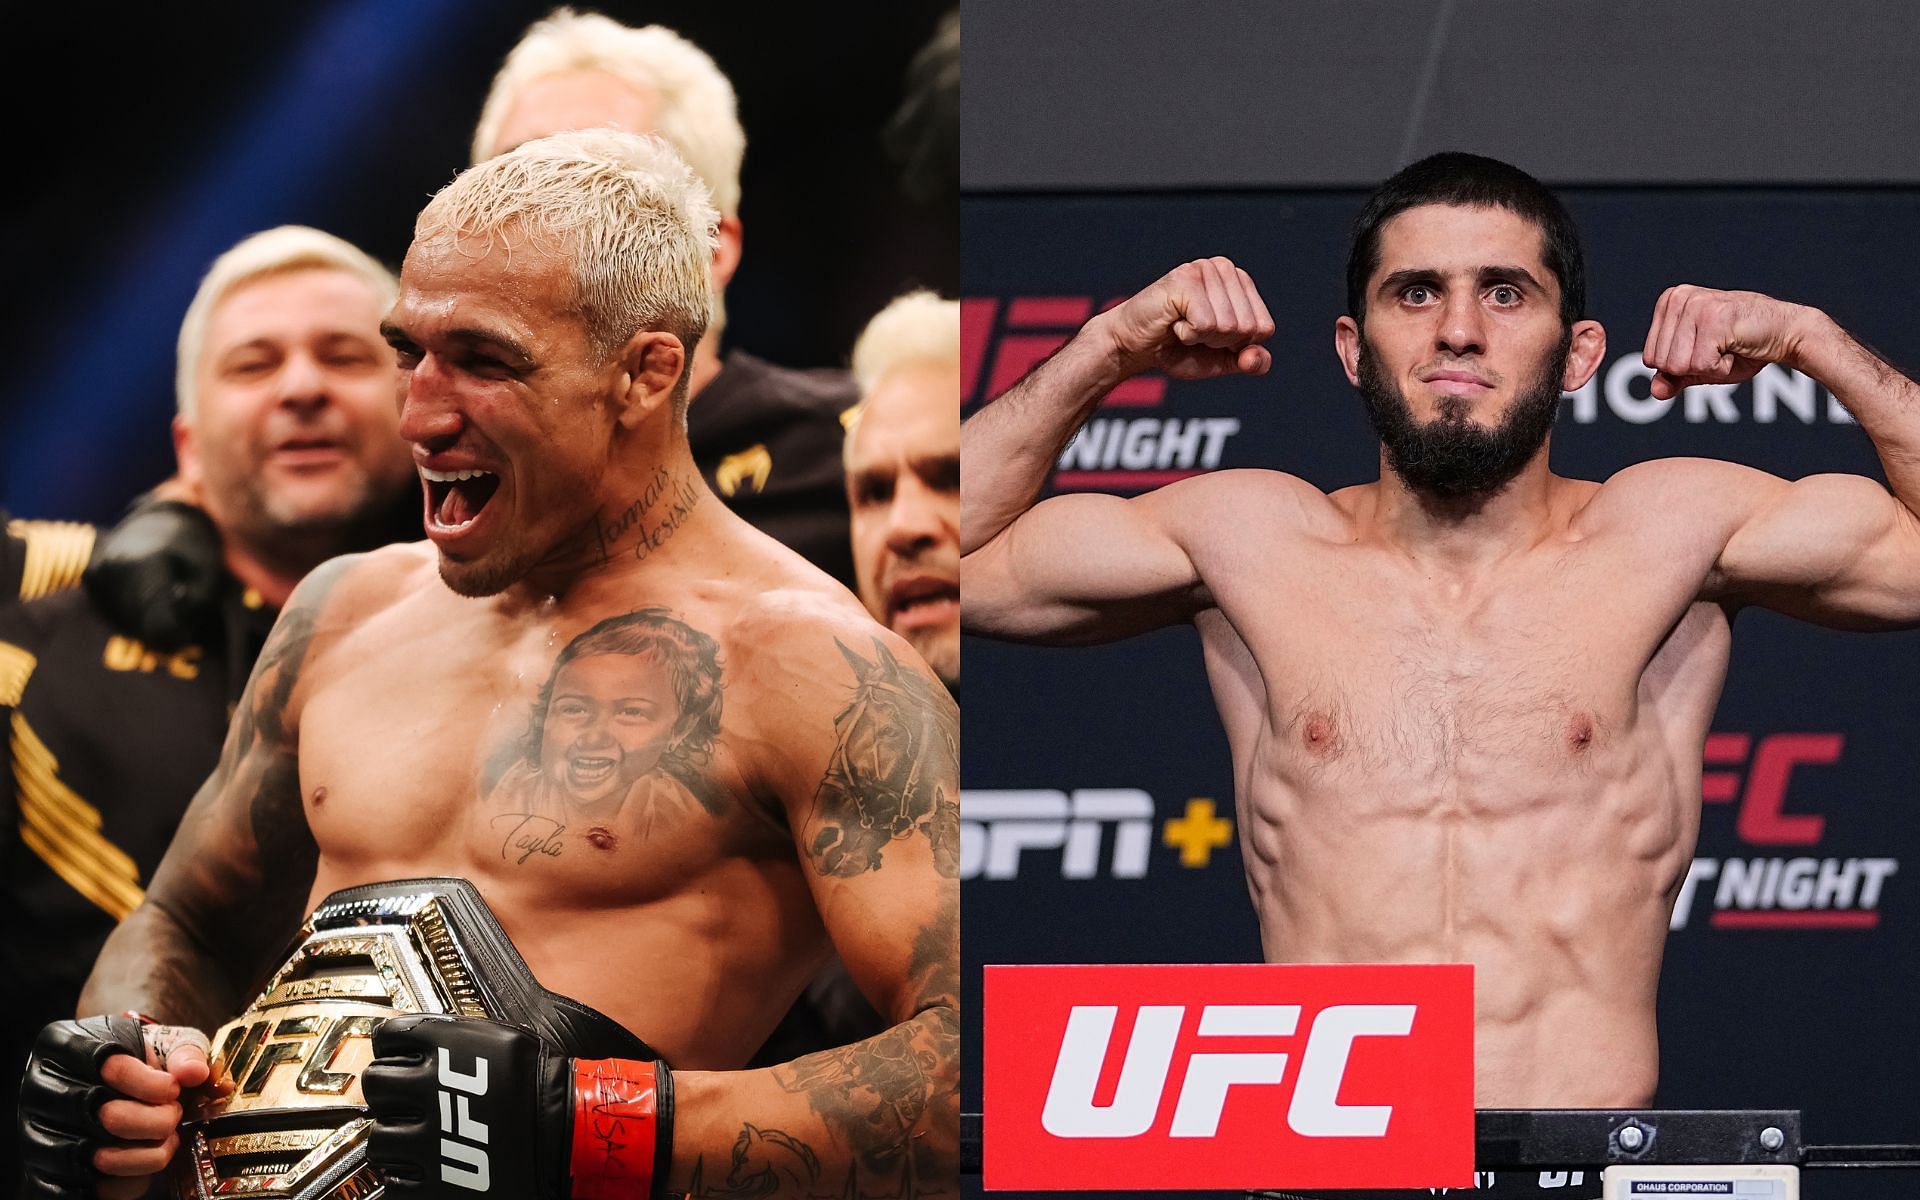 Charles Oliveira (left) and Islam Makhachev (right) (Image credits Getty Images)